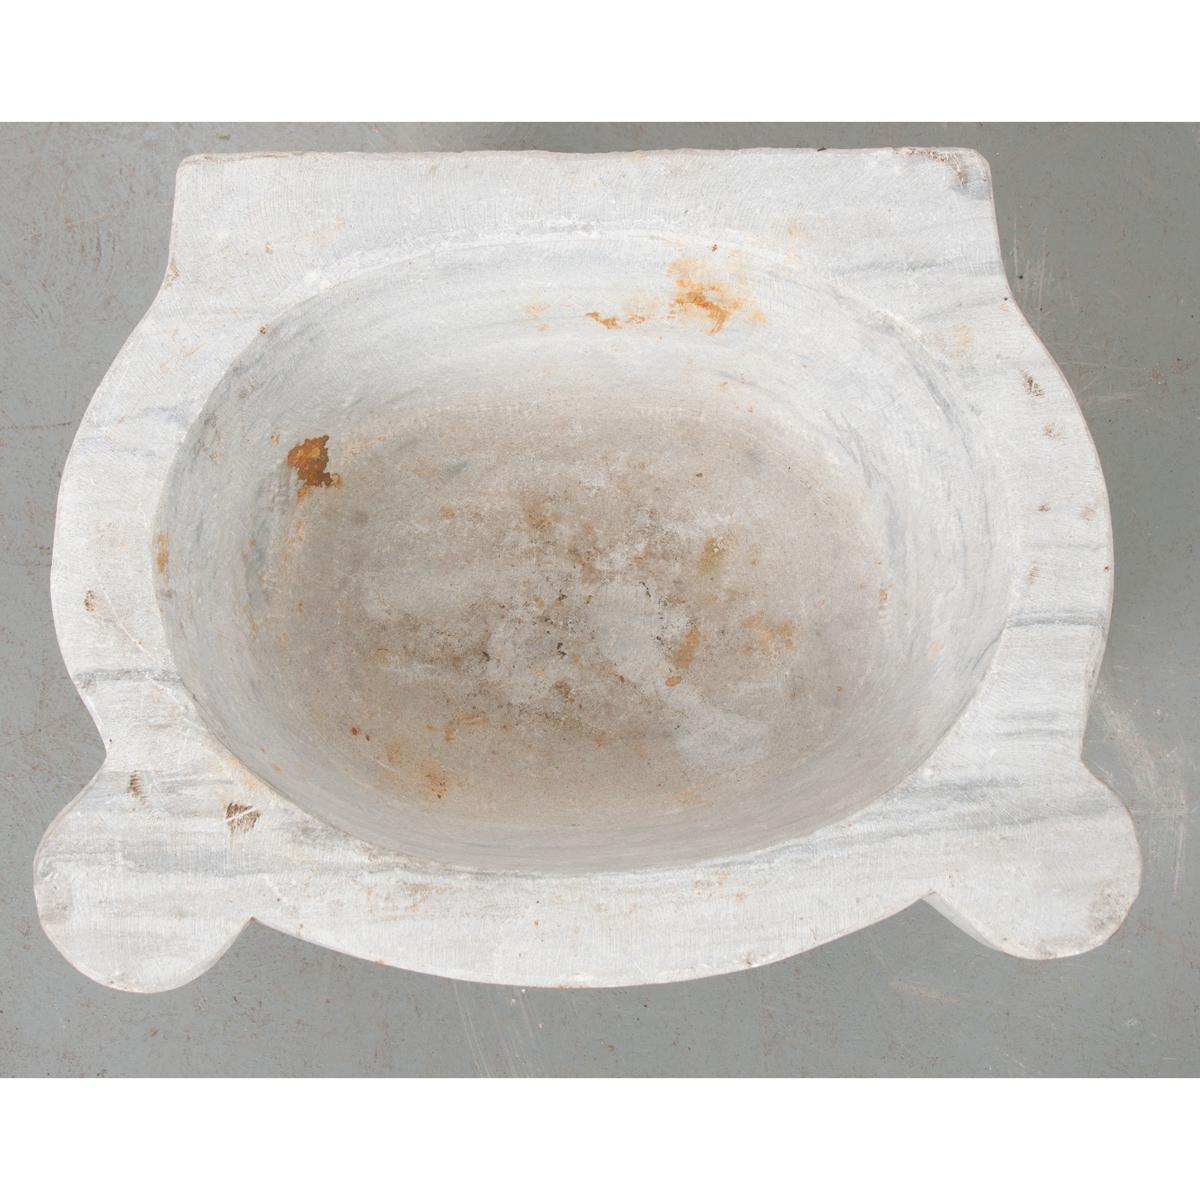 This is a European water basin with very thick walls. It is made of white marble with gray veins. This basin could easily be used as a basin for your bathroom, adding antique style and an appreciation for solid materials. 
 